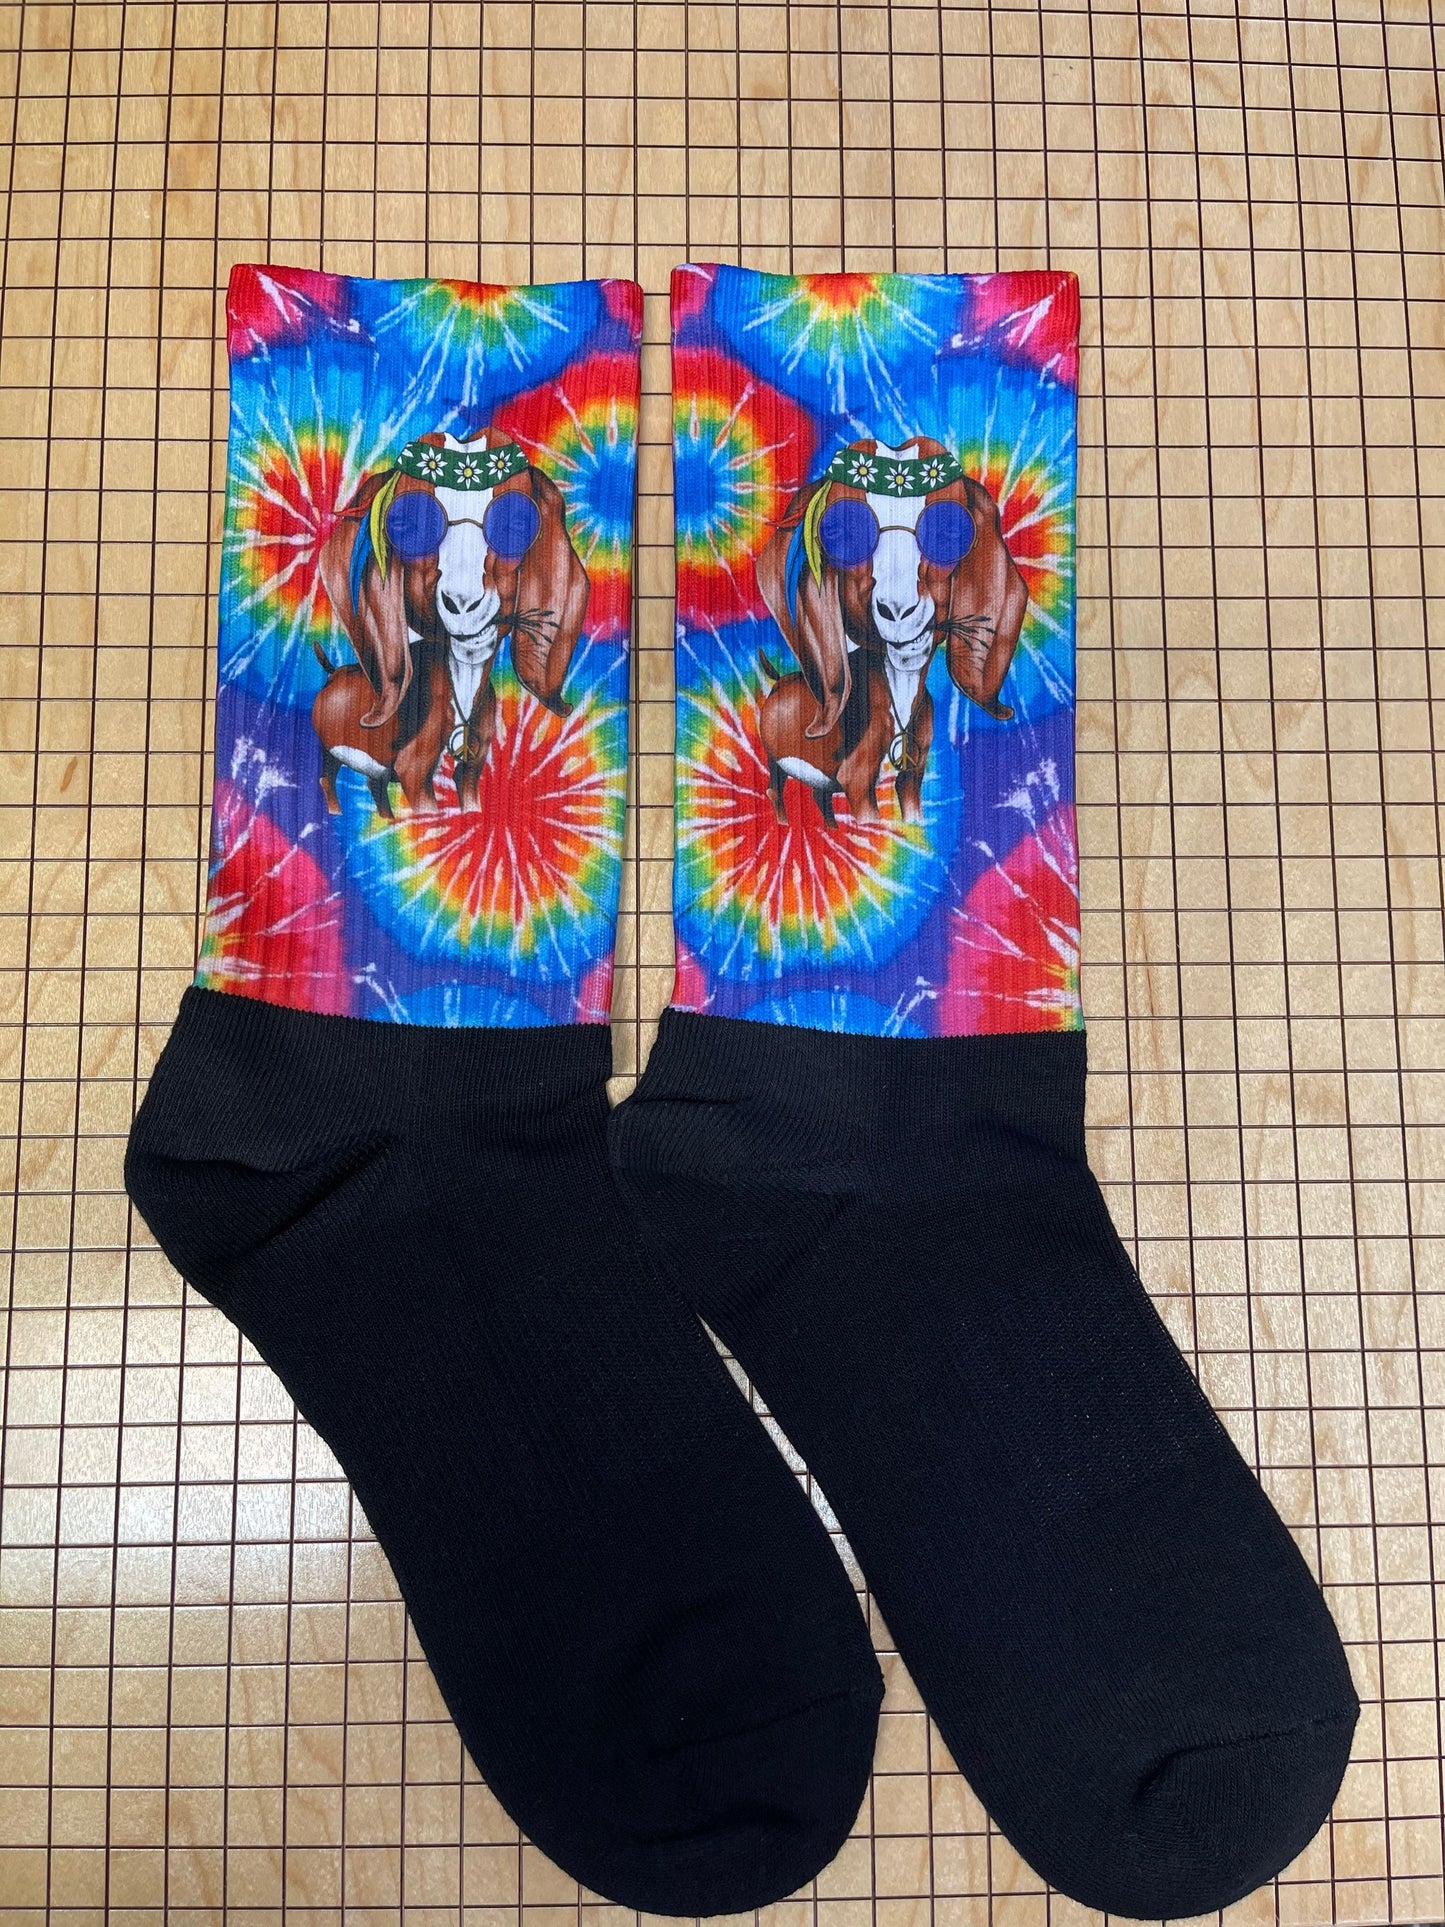 Hippy goat athletic socks. Handcrafted in the USA.